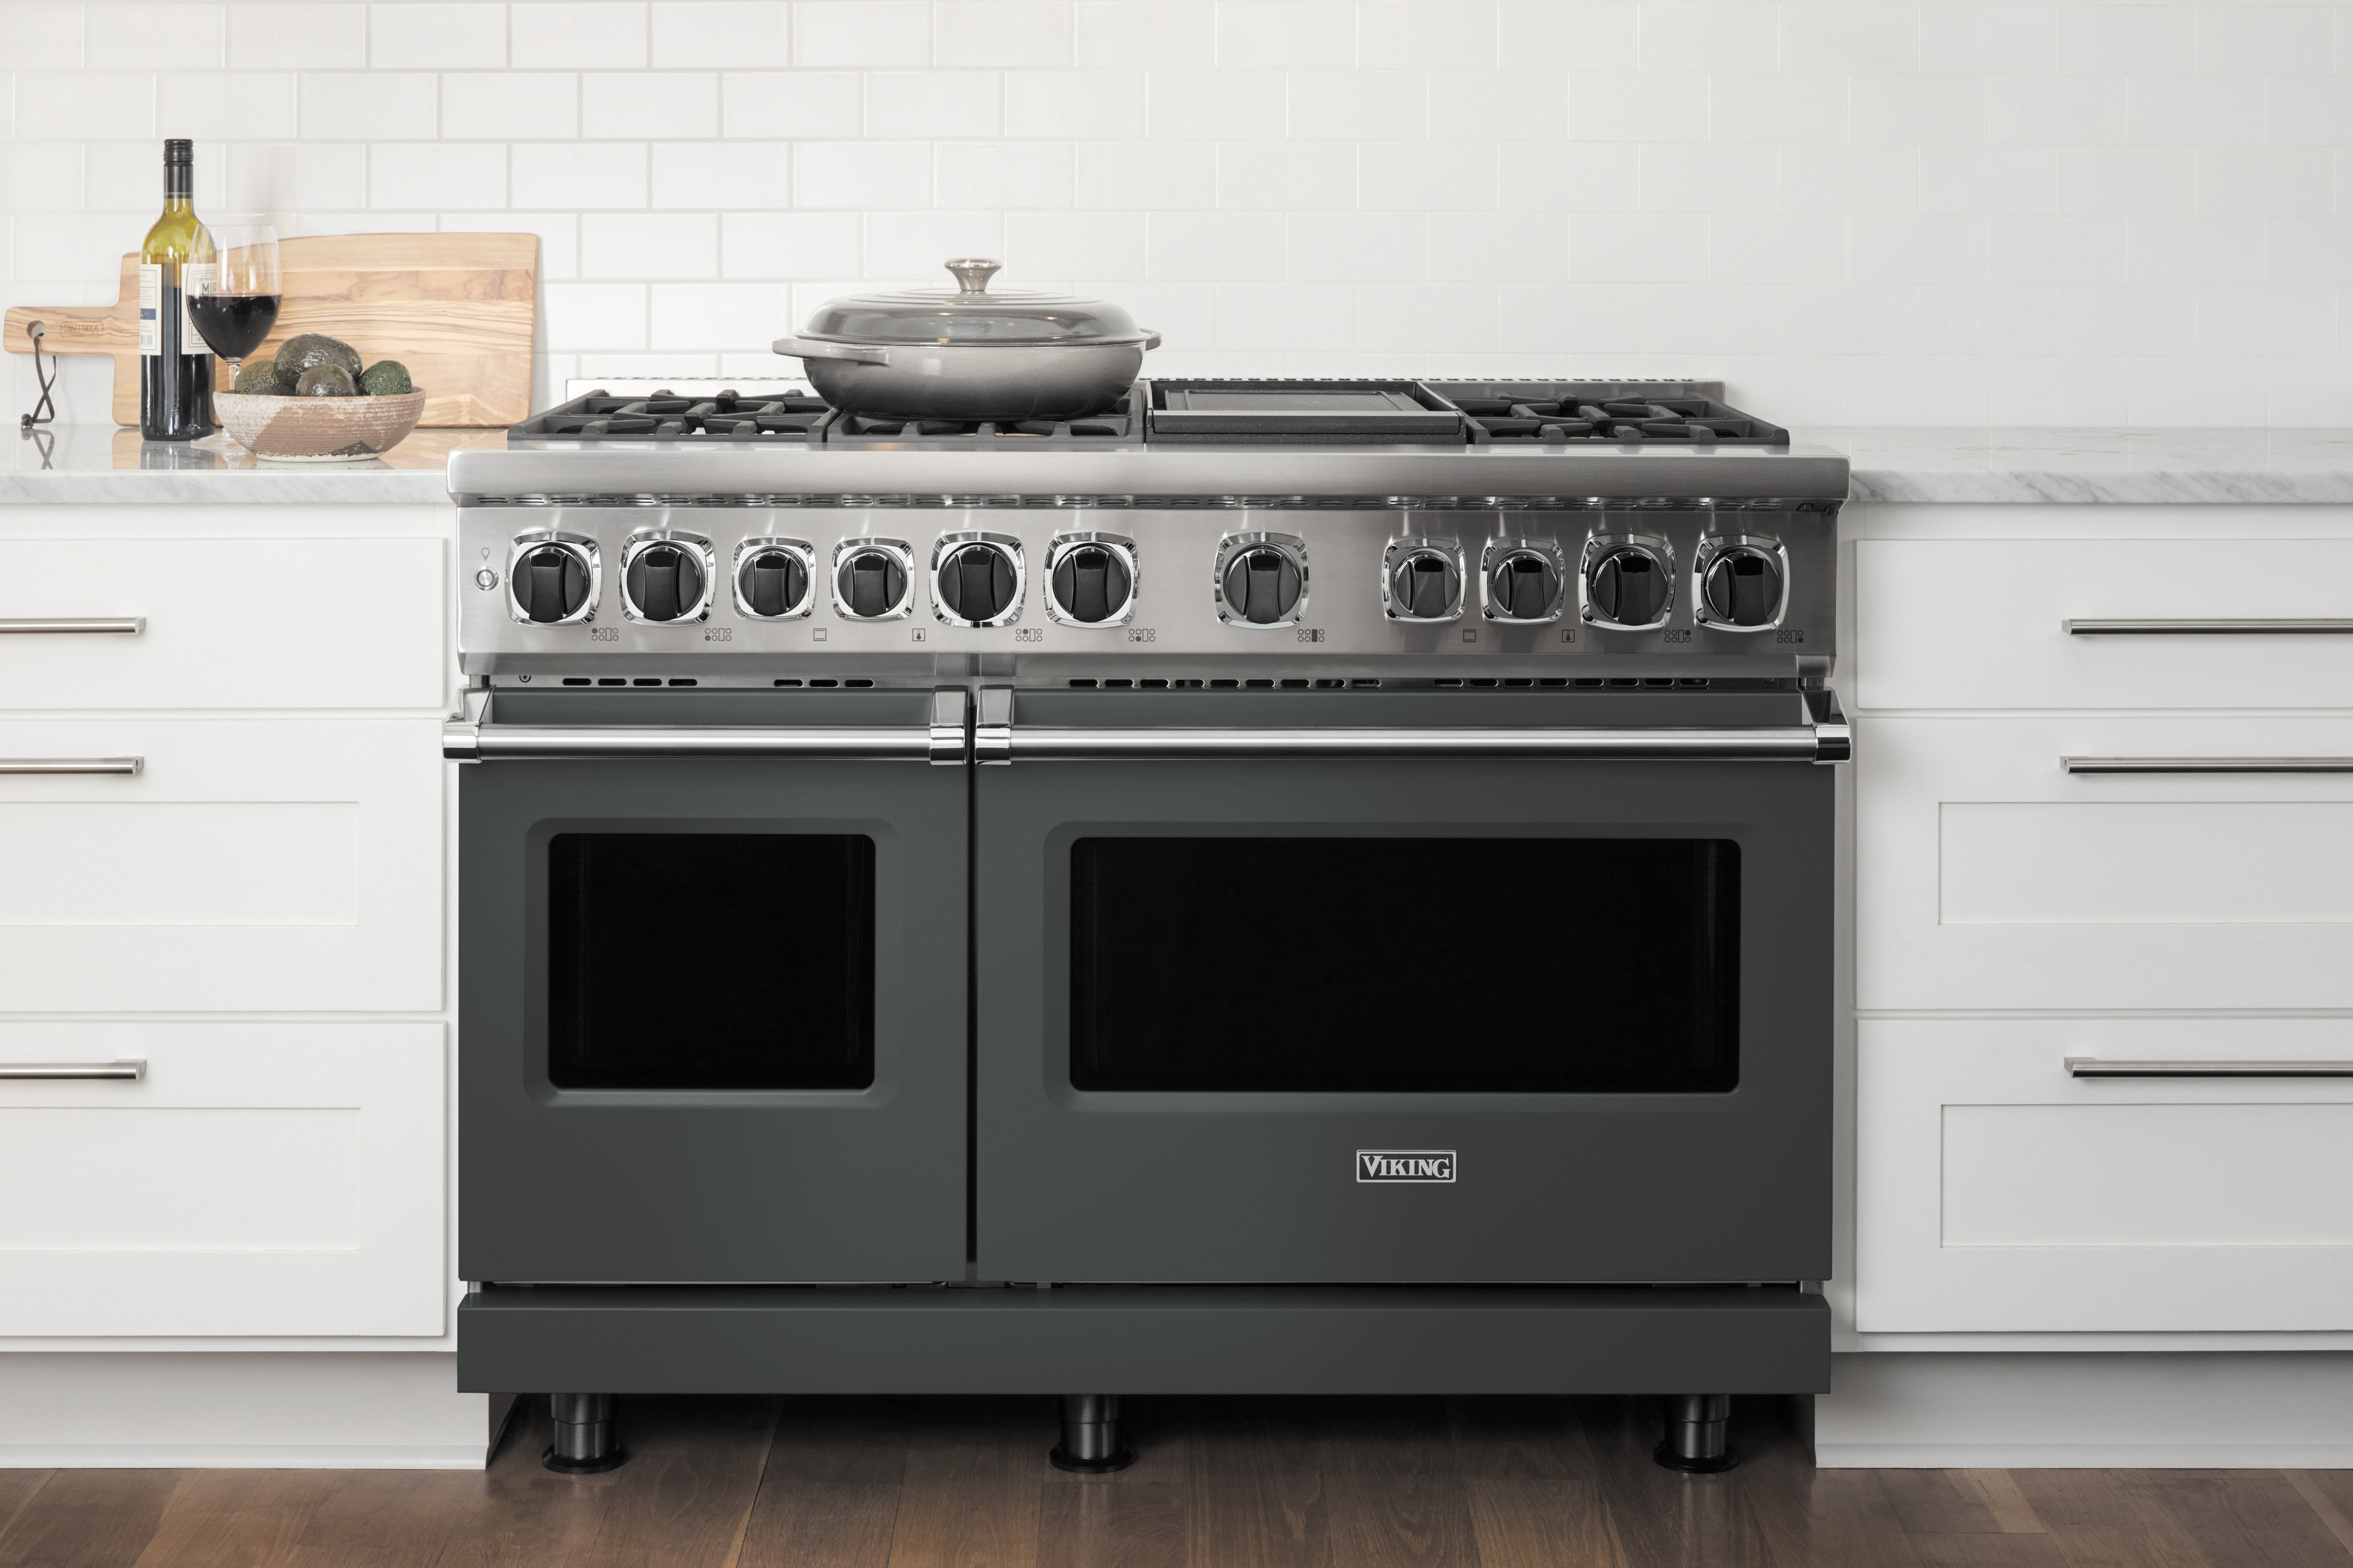 Viking VDSC5304BSS 30-Inch Dual-Fuel Range Review - Reviewed